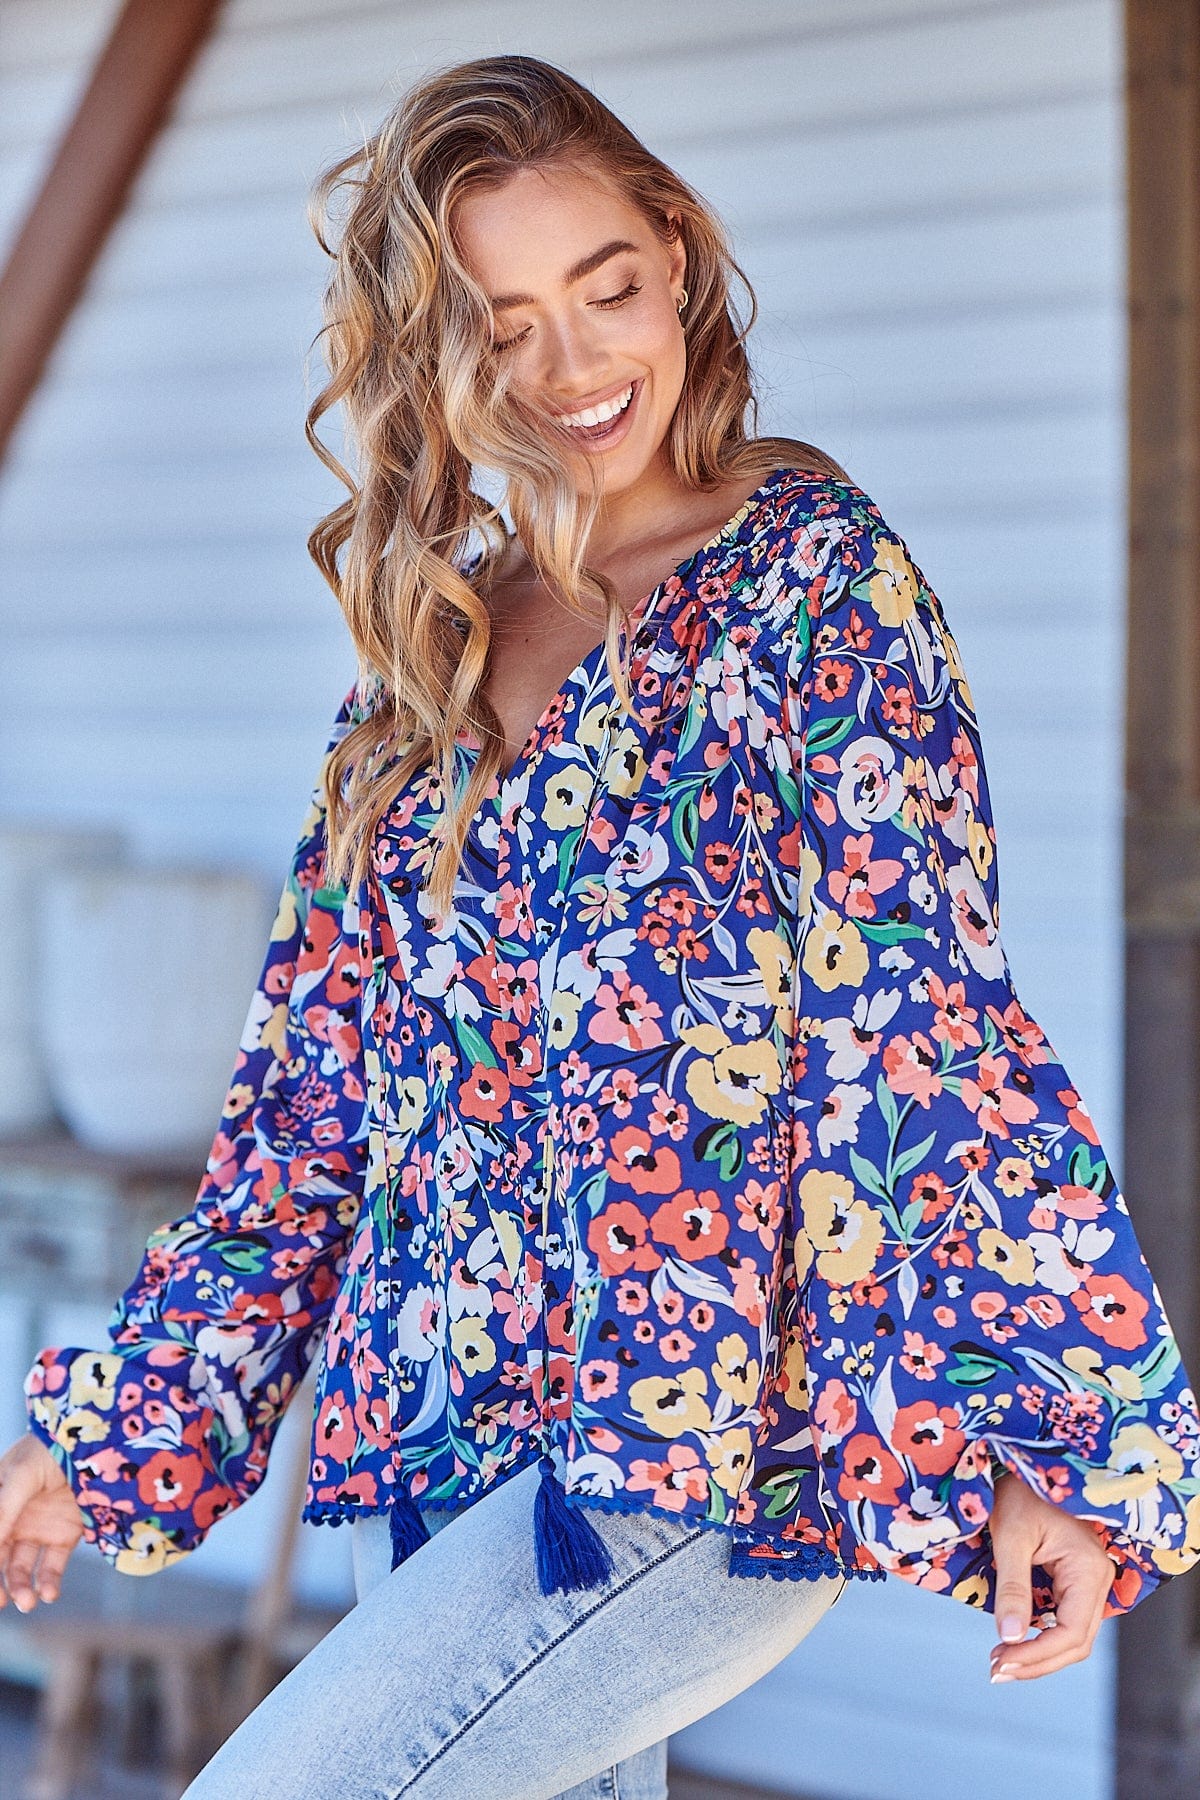 Introducing the Rue Top - Carnation Print. Rock the V-neckline and tassel ties while staying cozy in the oversized, long-sleeve design with cuff. Perfect for adding a touch of fun to any outfit!